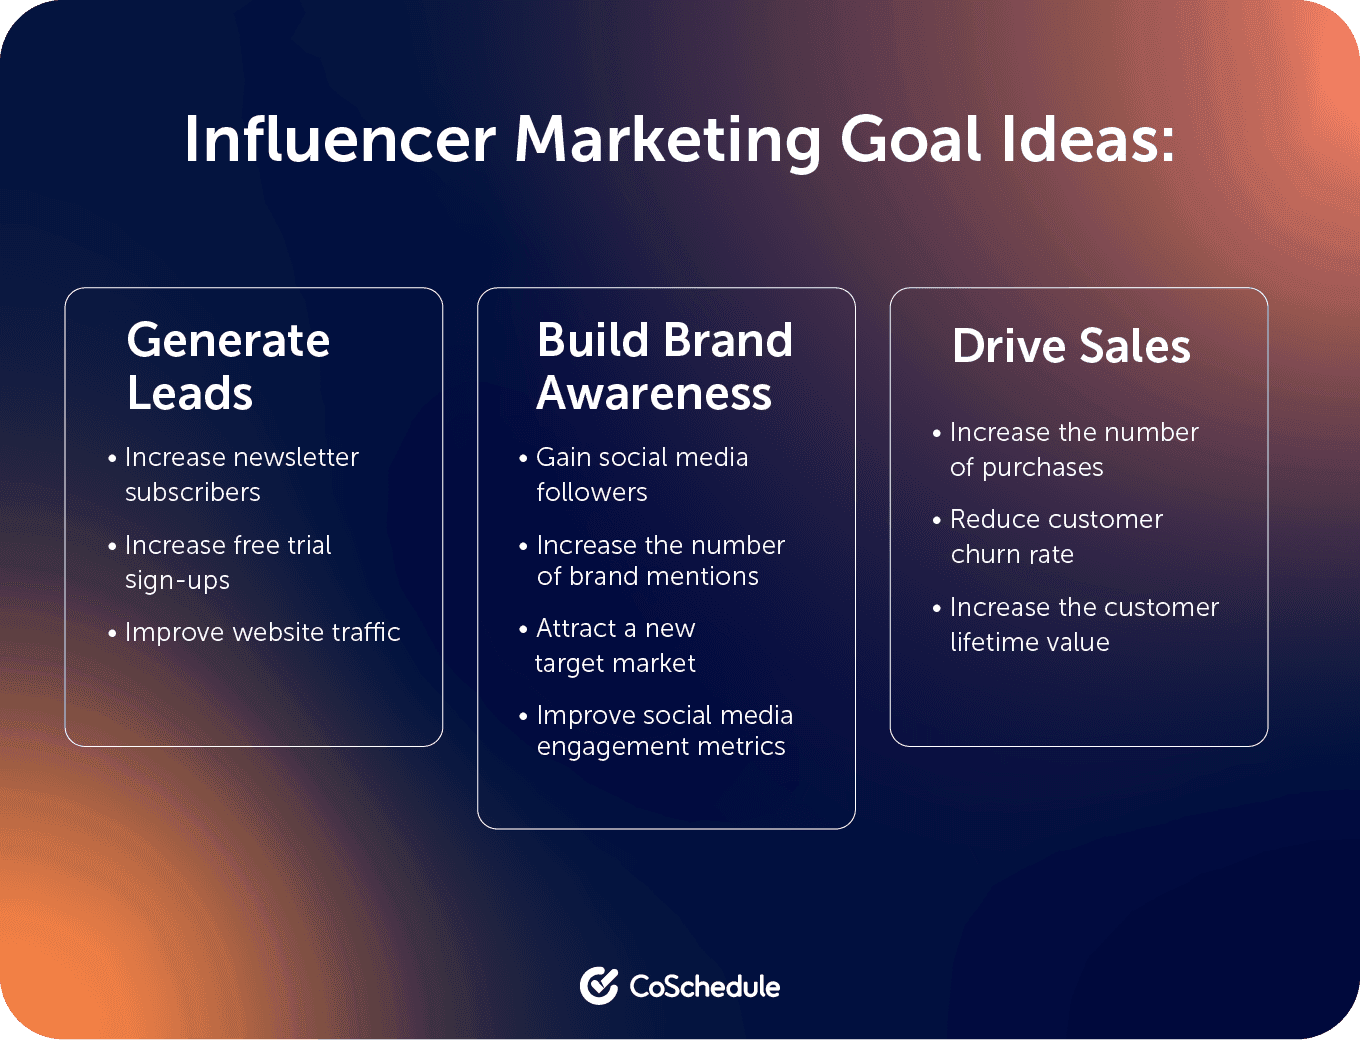 Influencer Marketing Goal Ideas presented by CoSchedule showing how to Generate Leads, Build Brand Awareness and Drive Sales.